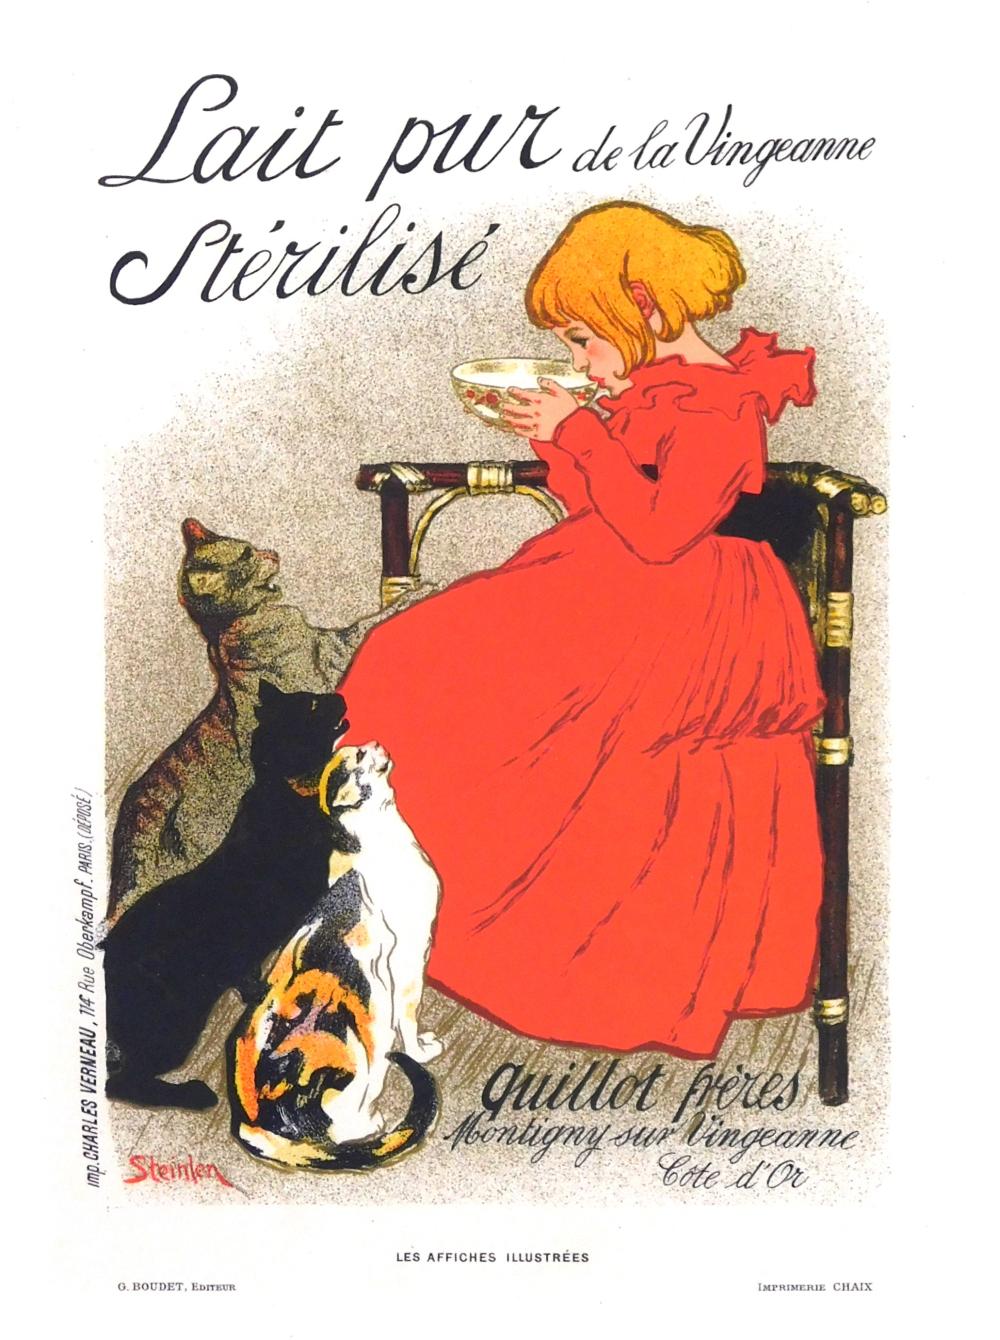 TH OPHILE STEINLEN FRENCH 1859 1923  31e9f0